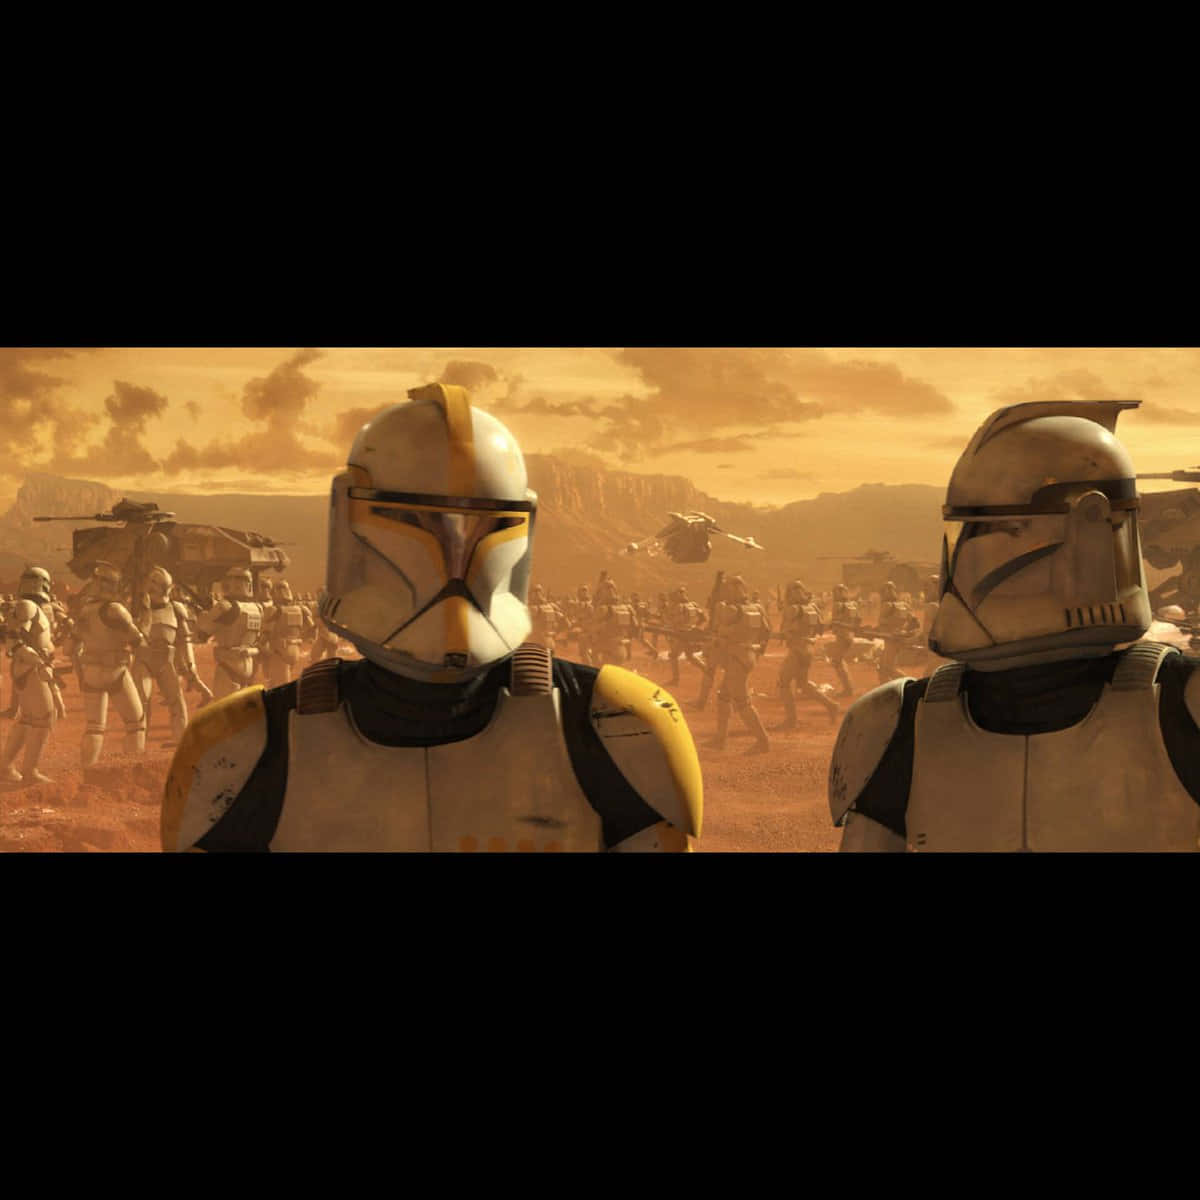 Join the Battle of Geonosis Wallpaper